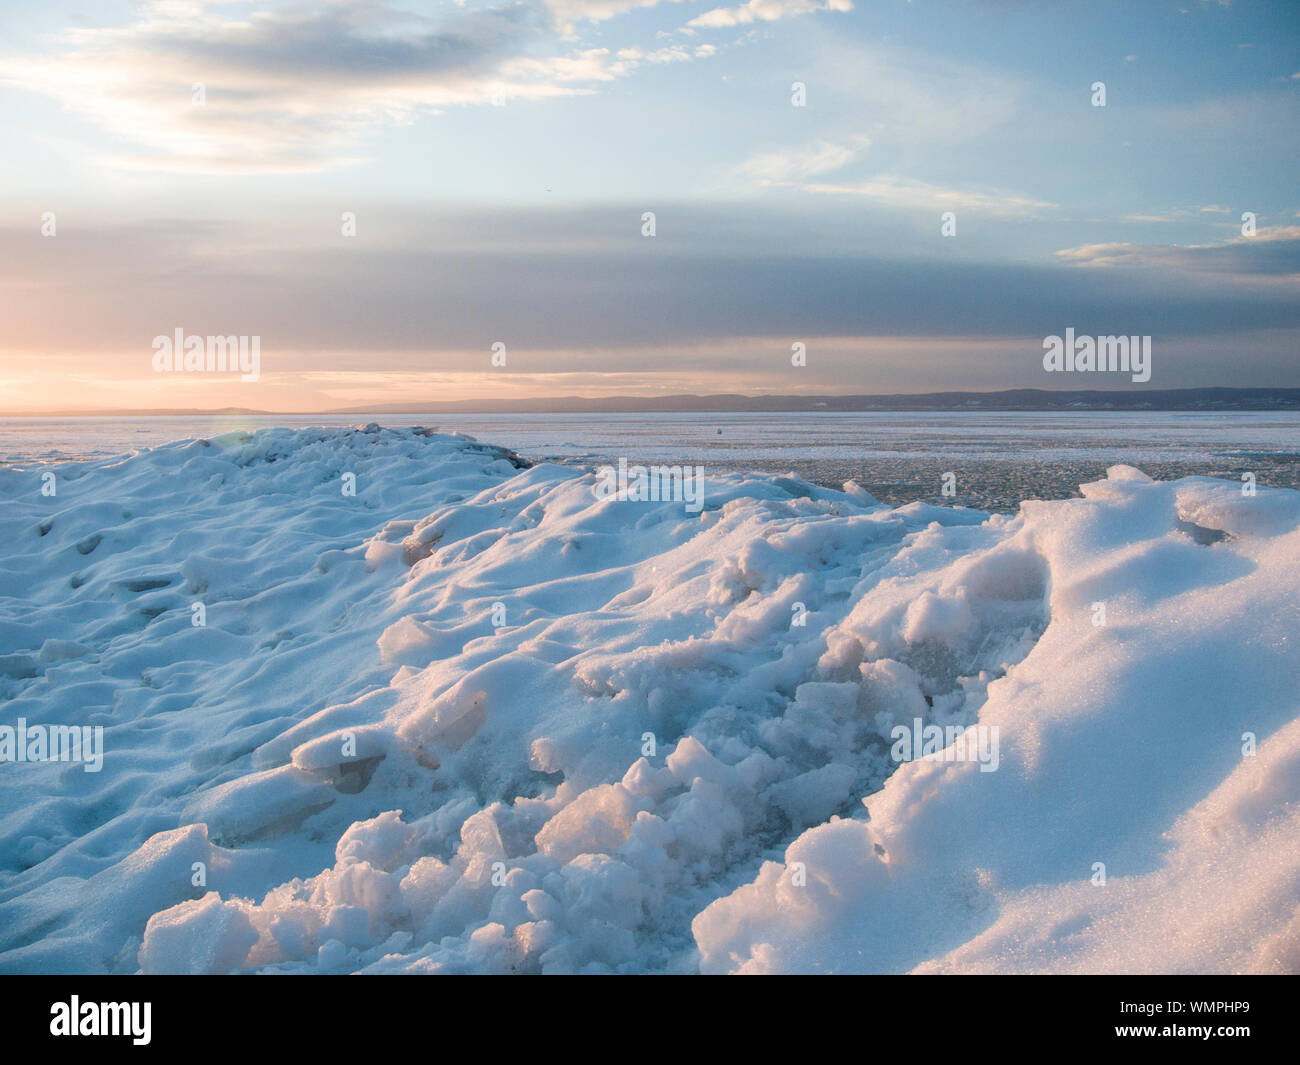 Scenic View Of Frozen Lake Neusiedl Against Sky During Sunset Stock Photo